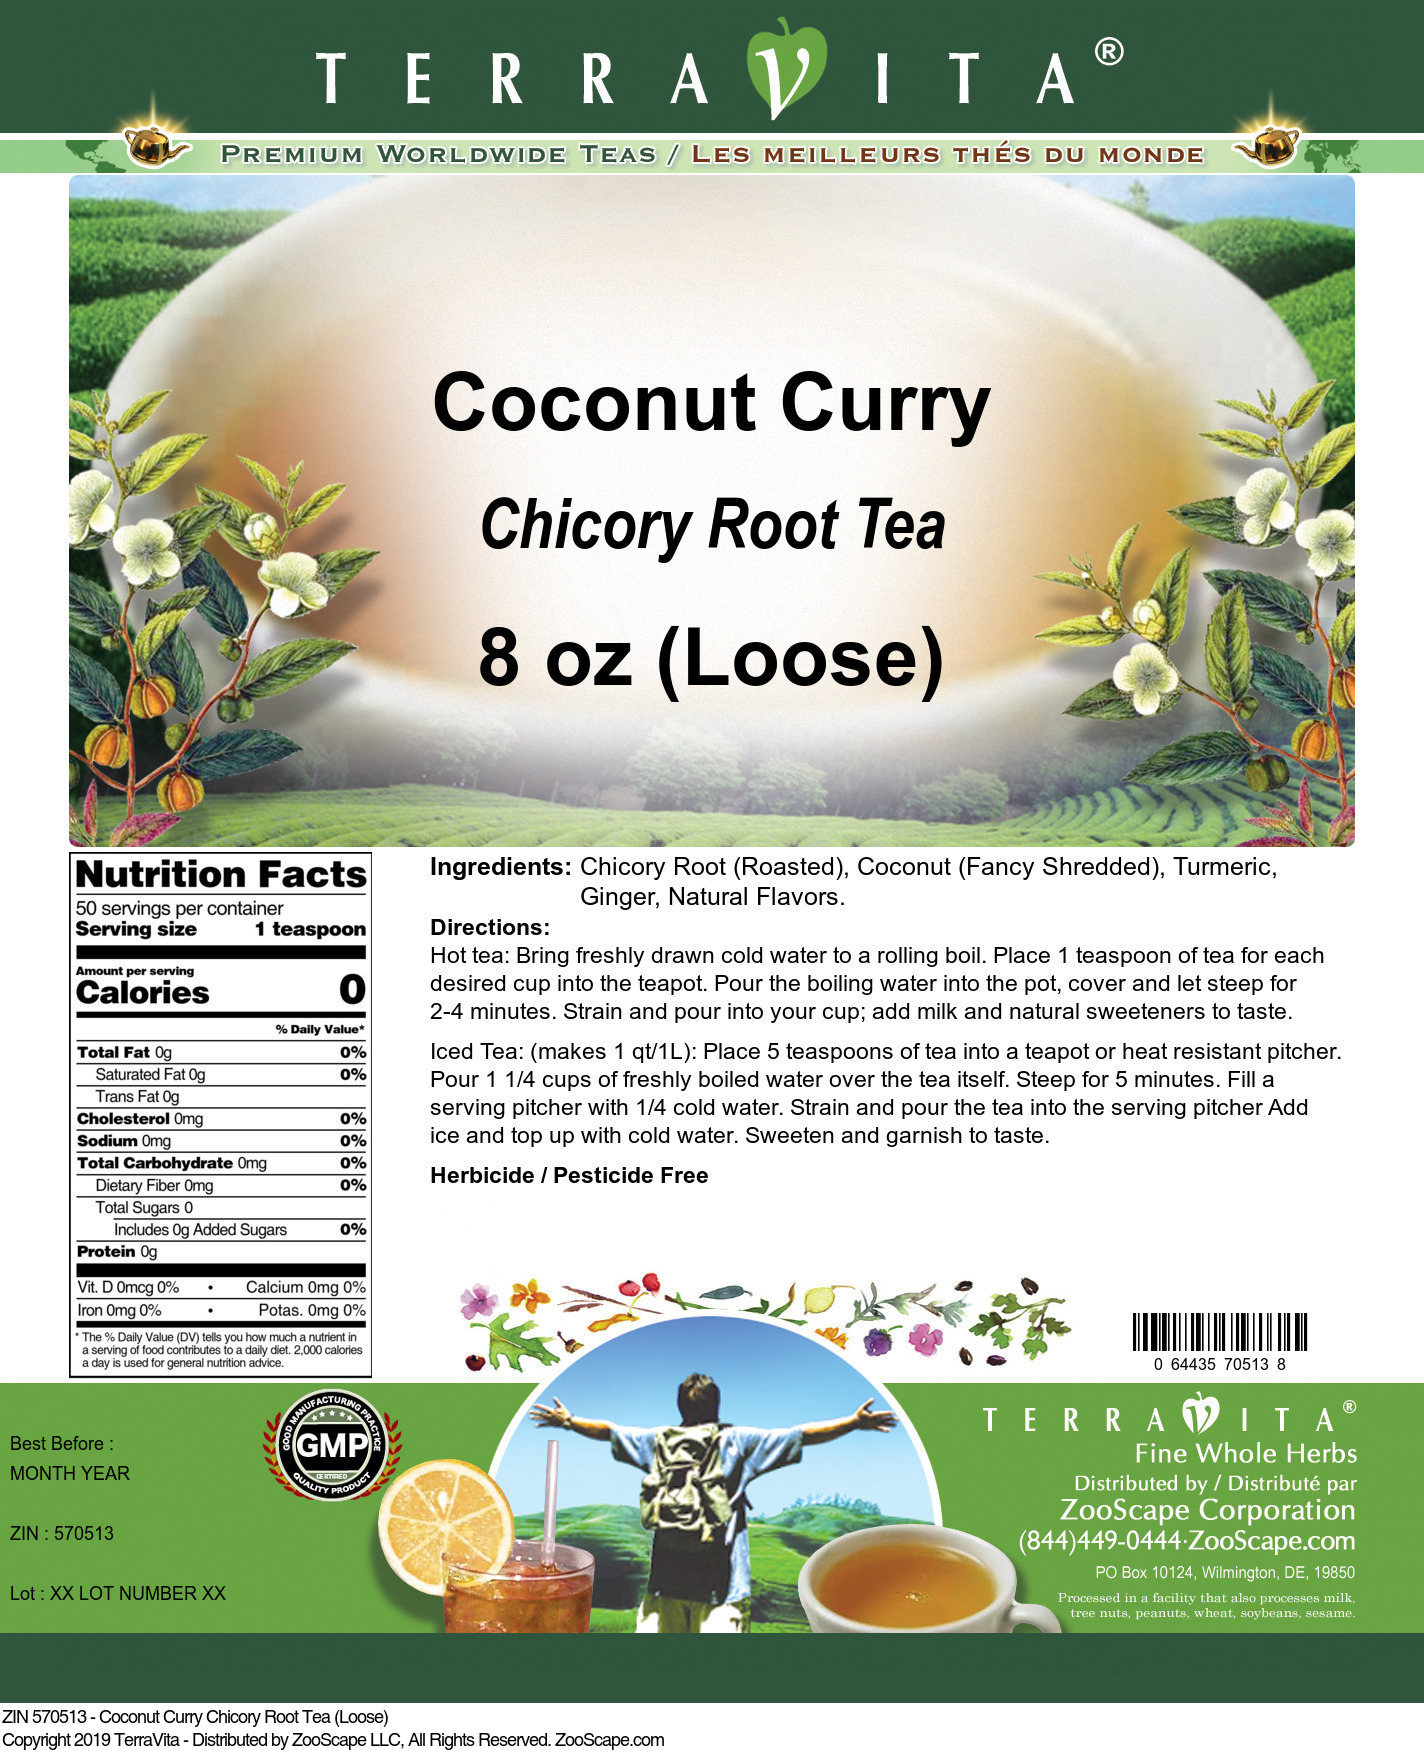 Coconut Curry Chicory Root Tea (Loose) - Label